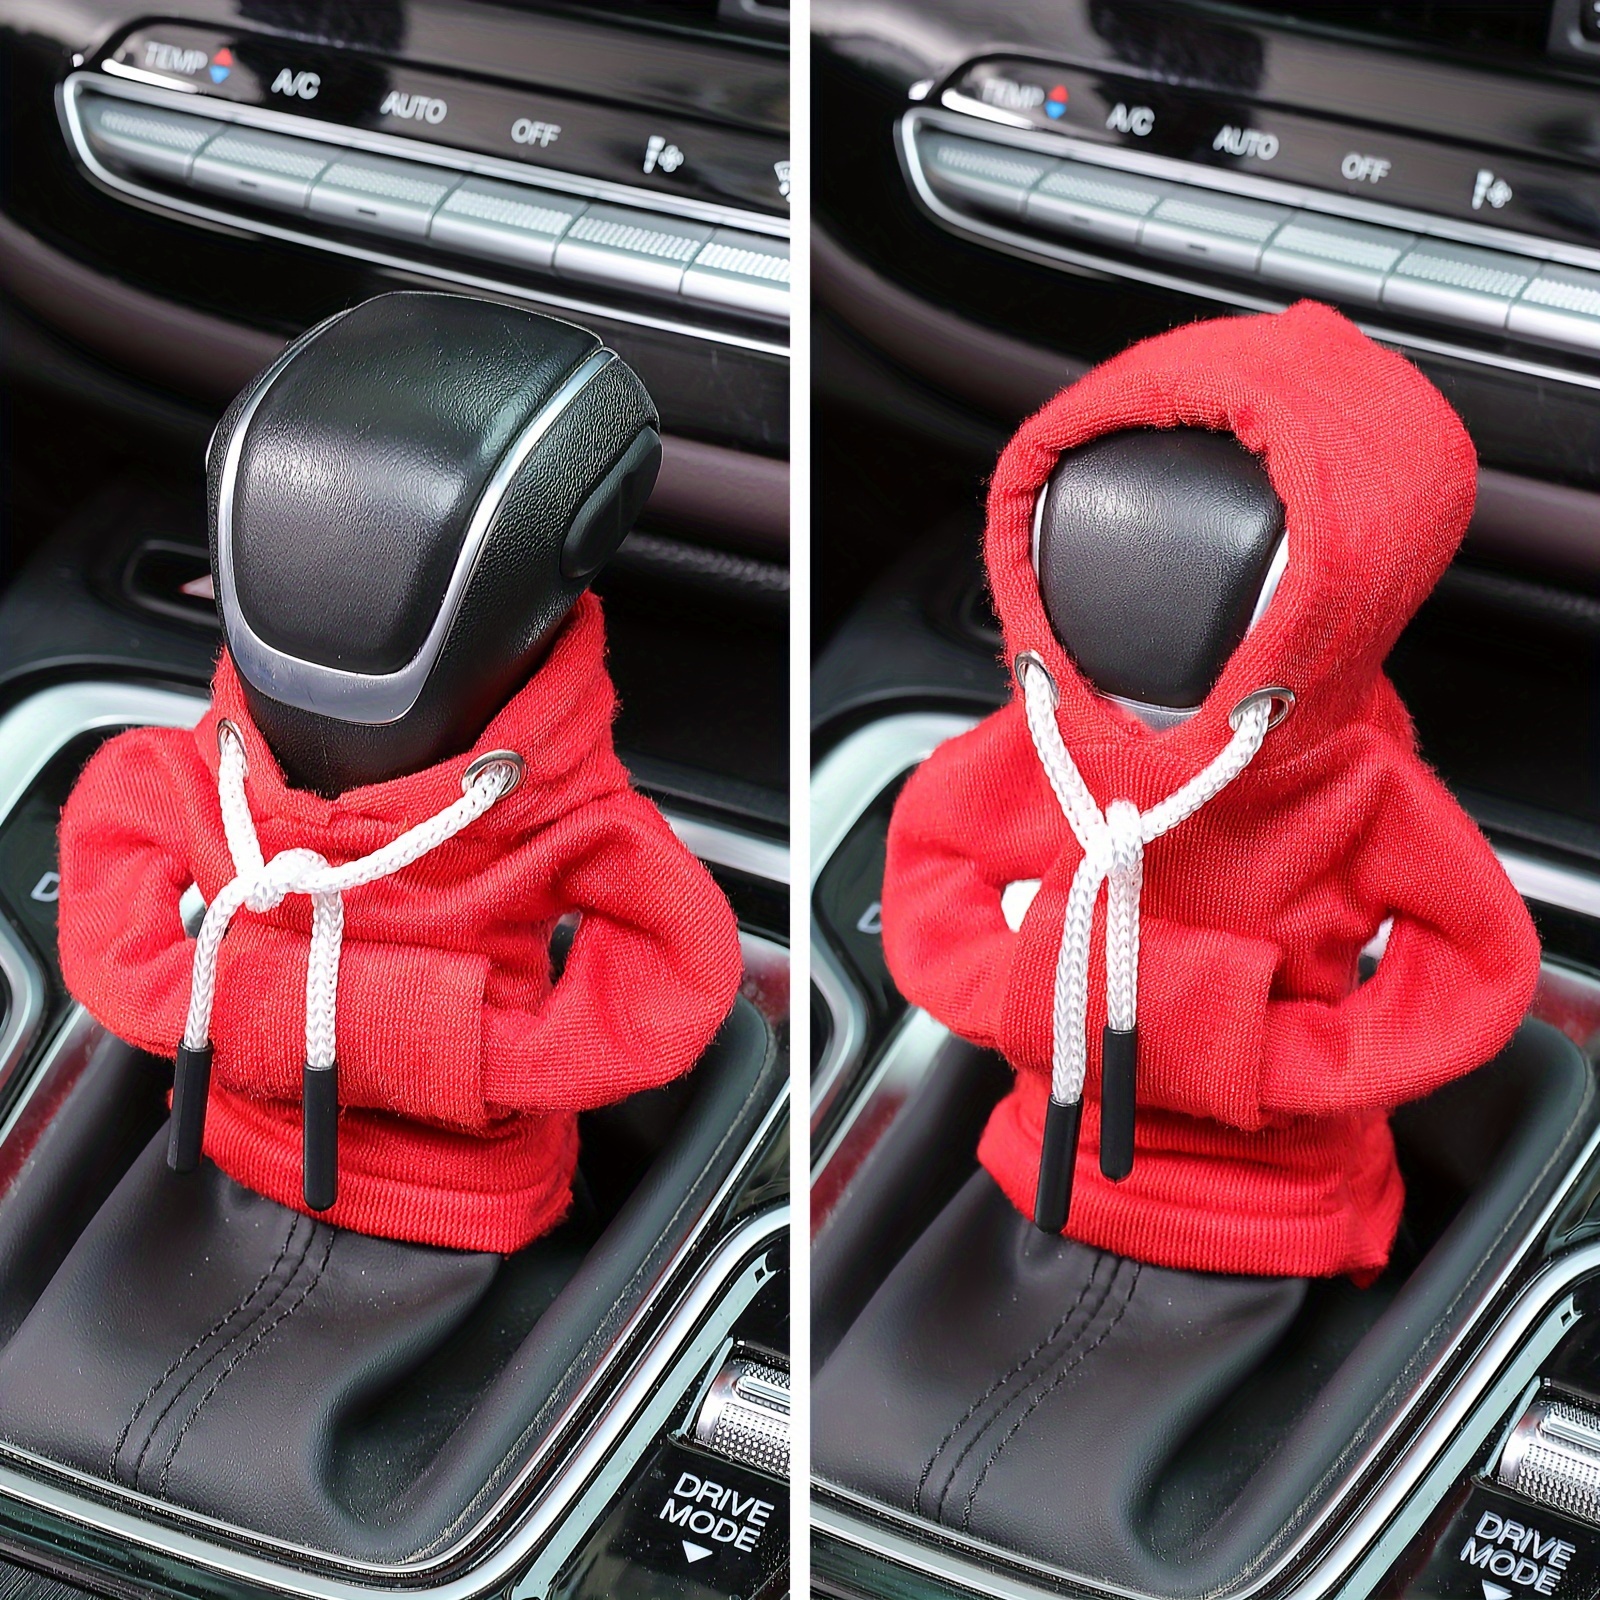  VEADONS Car Shift Knob Hoodies Cover,2023 Newest Car Universal  Gear Shift Knob Cover,Trendy Hoodies for Car Shifter,Fashionable Automotive  Interior Accessories (1PC/Red) : Automotive